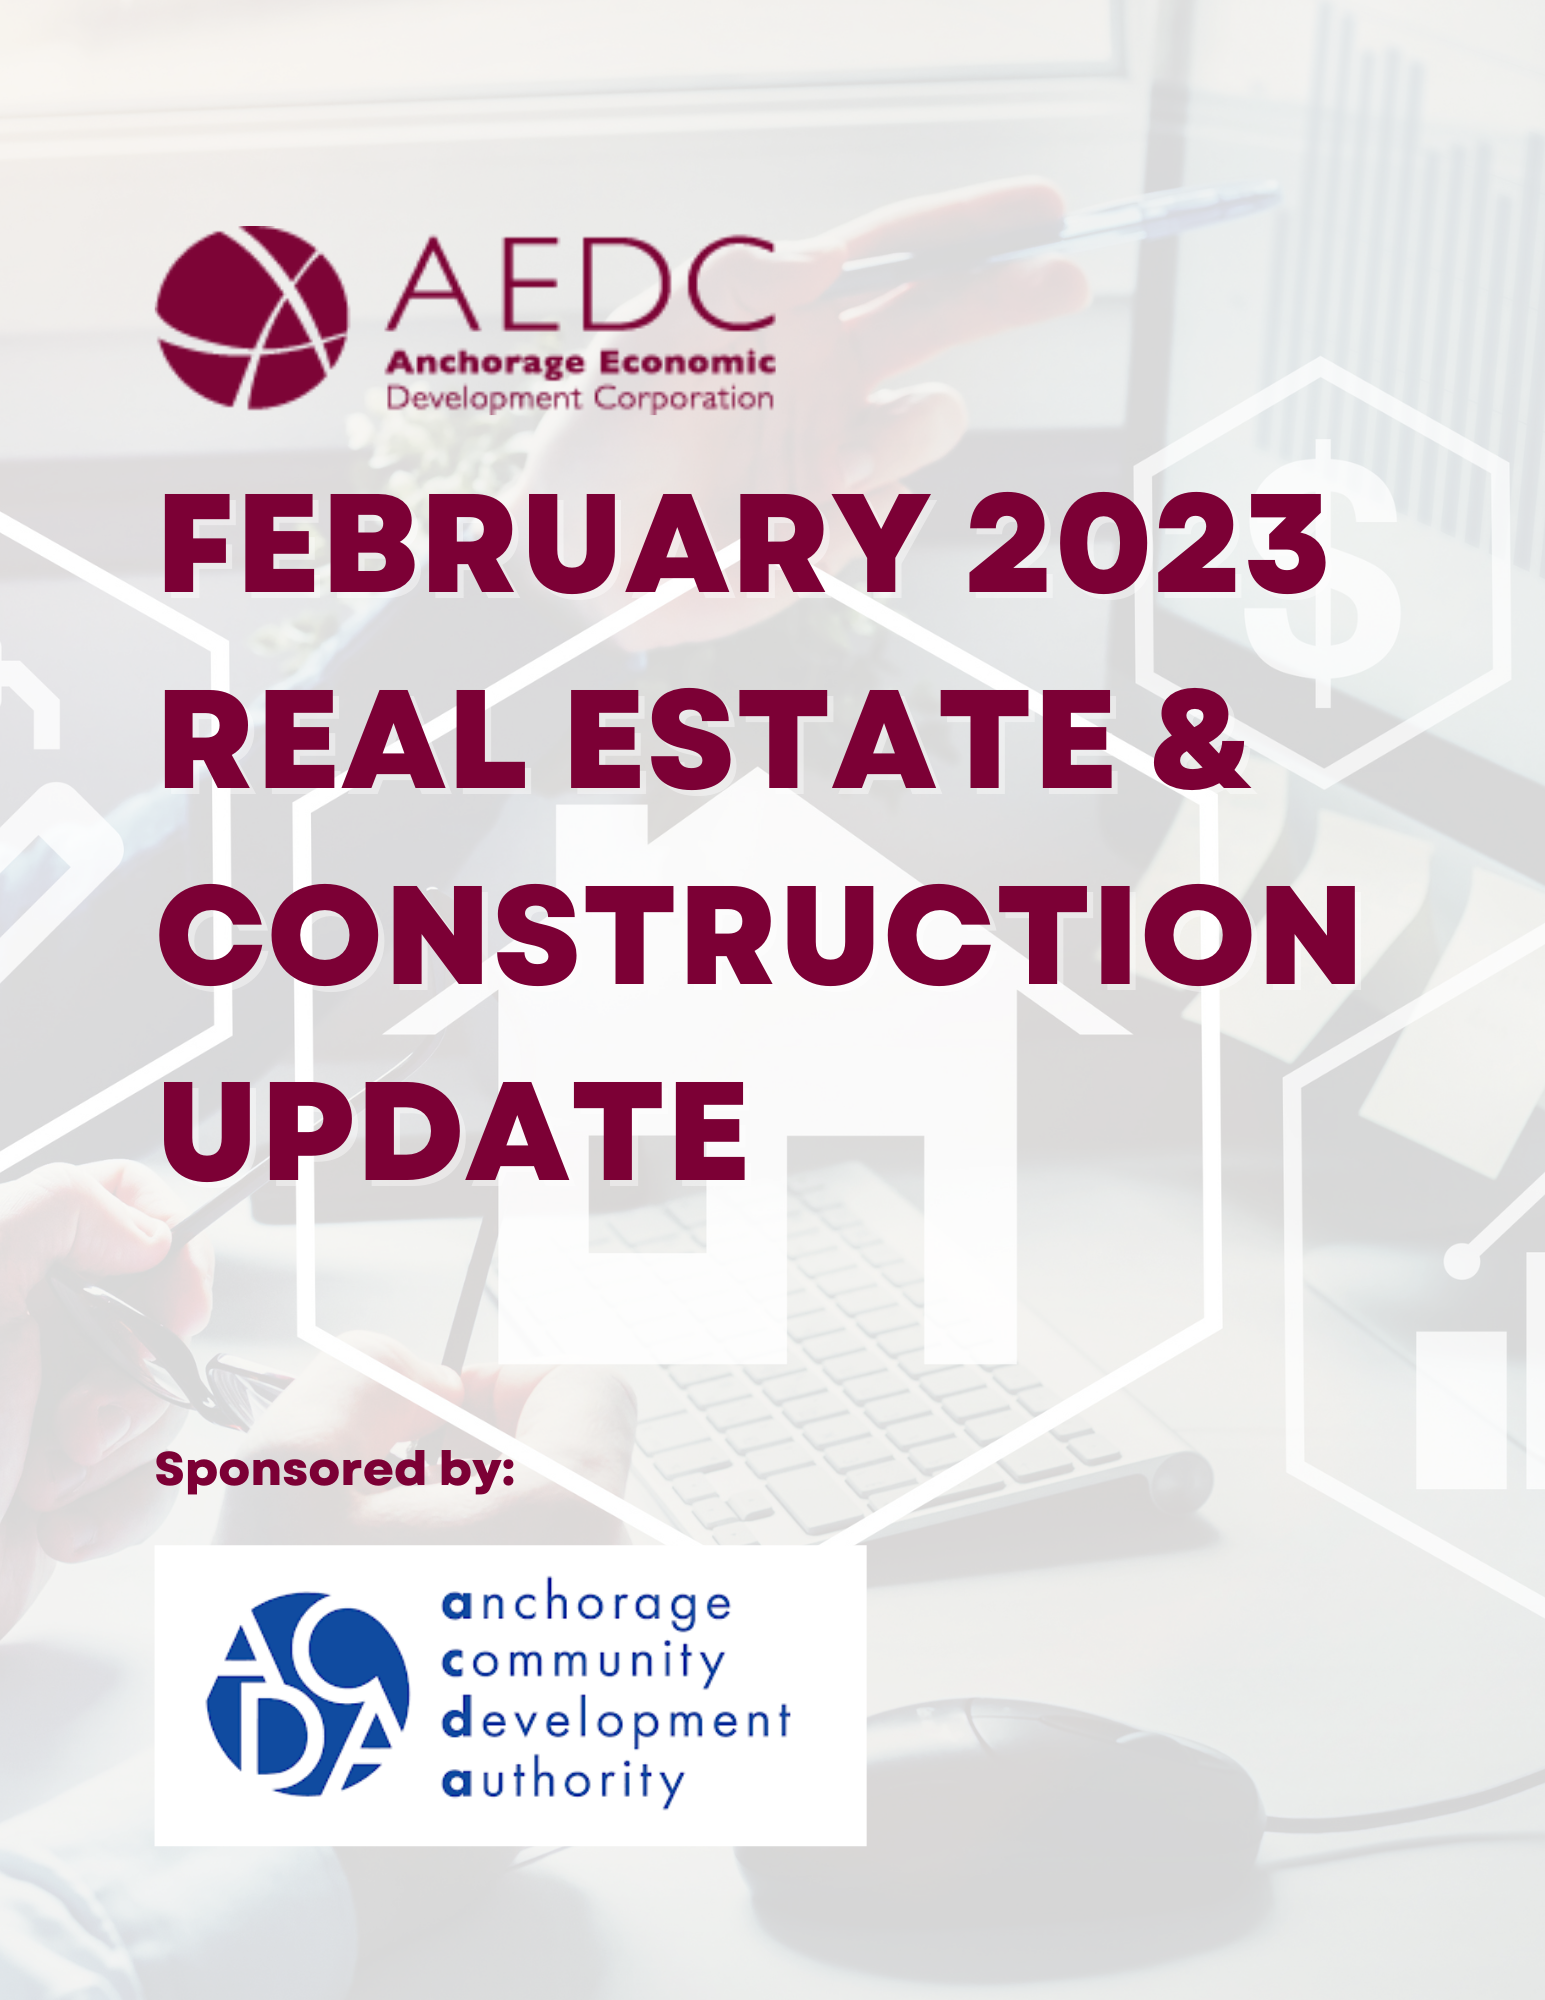 February 2023 Real Estate & Construction Update